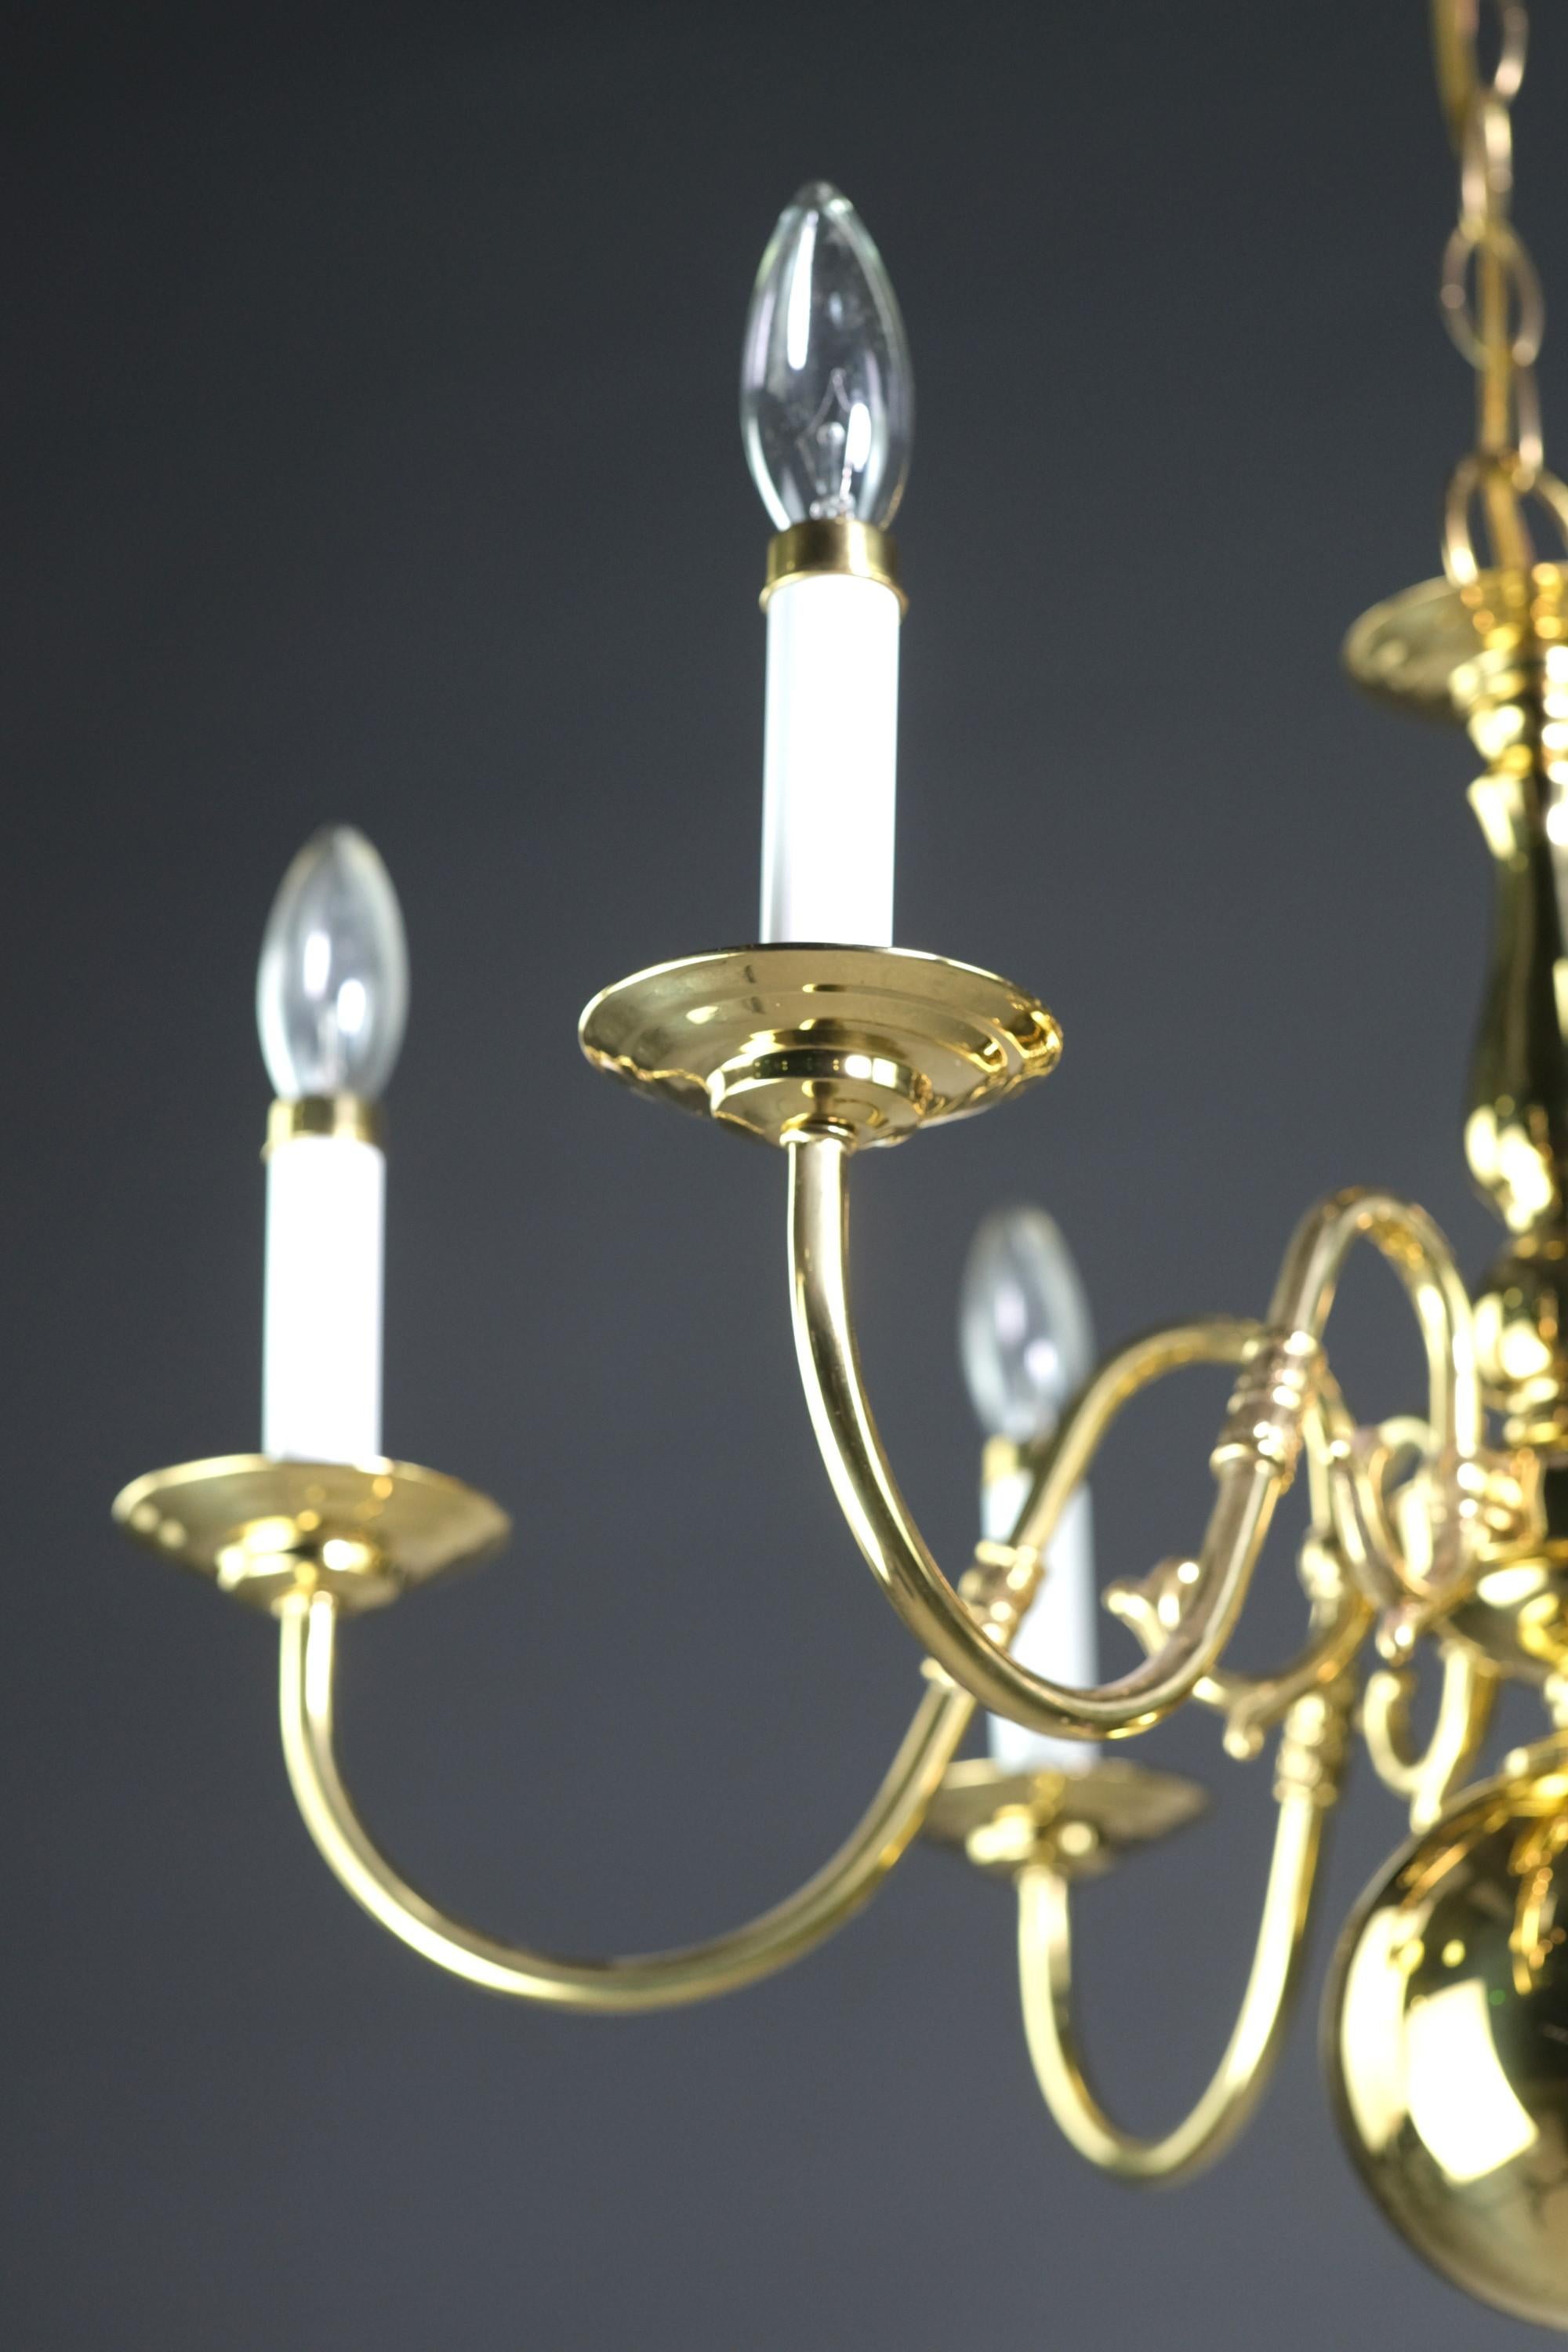 American Restored Williamsburg Style Polished Brass Chandelier 6 Arms For Sale